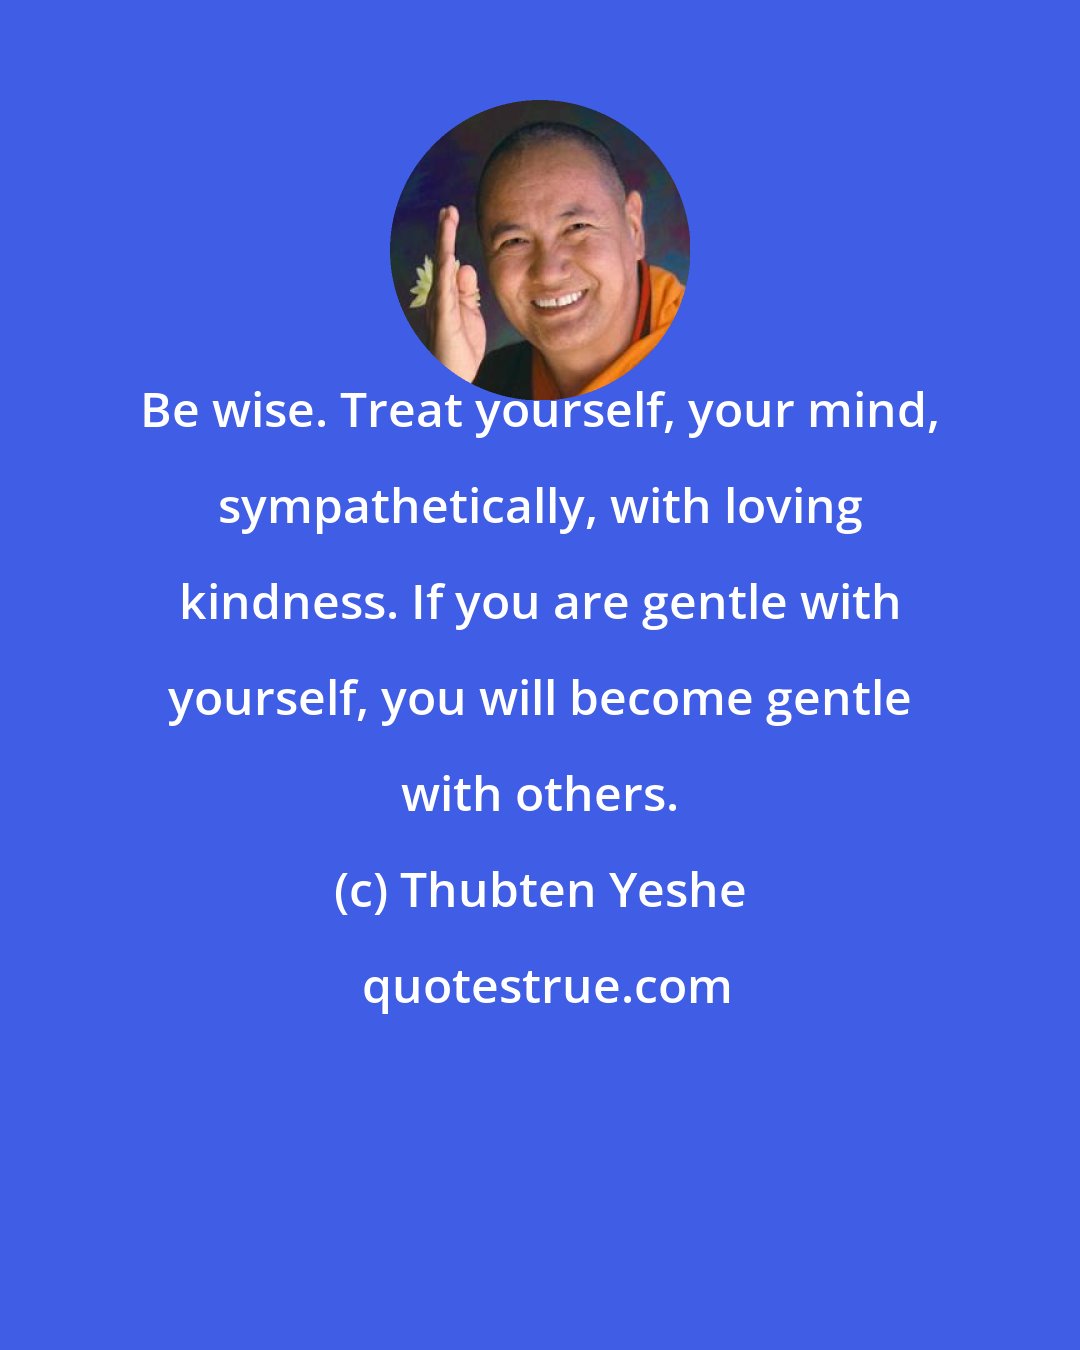 Thubten Yeshe: Be wise. Treat yourself, your mind, sympathetically, with loving kindness. If you are gentle with yourself, you will become gentle with others.